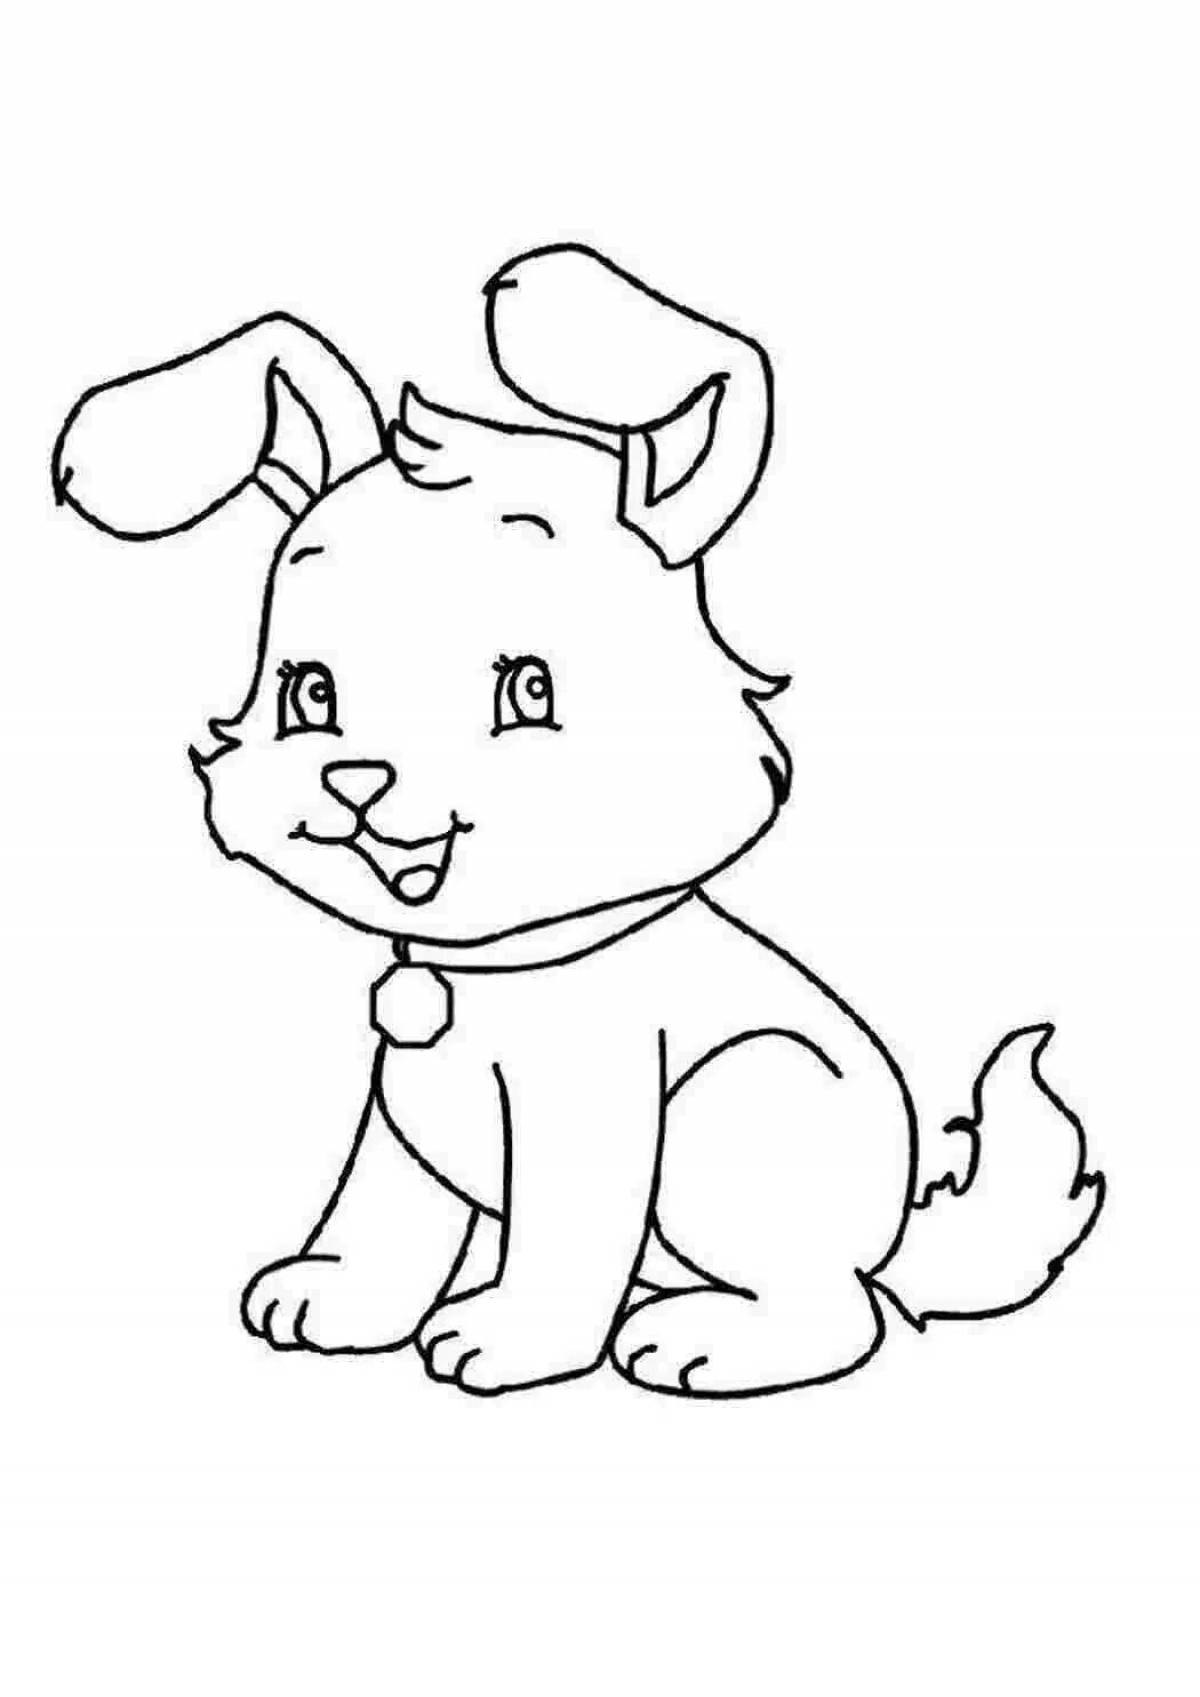 Funny coloring pages cats and dogs for children 3 4 years old